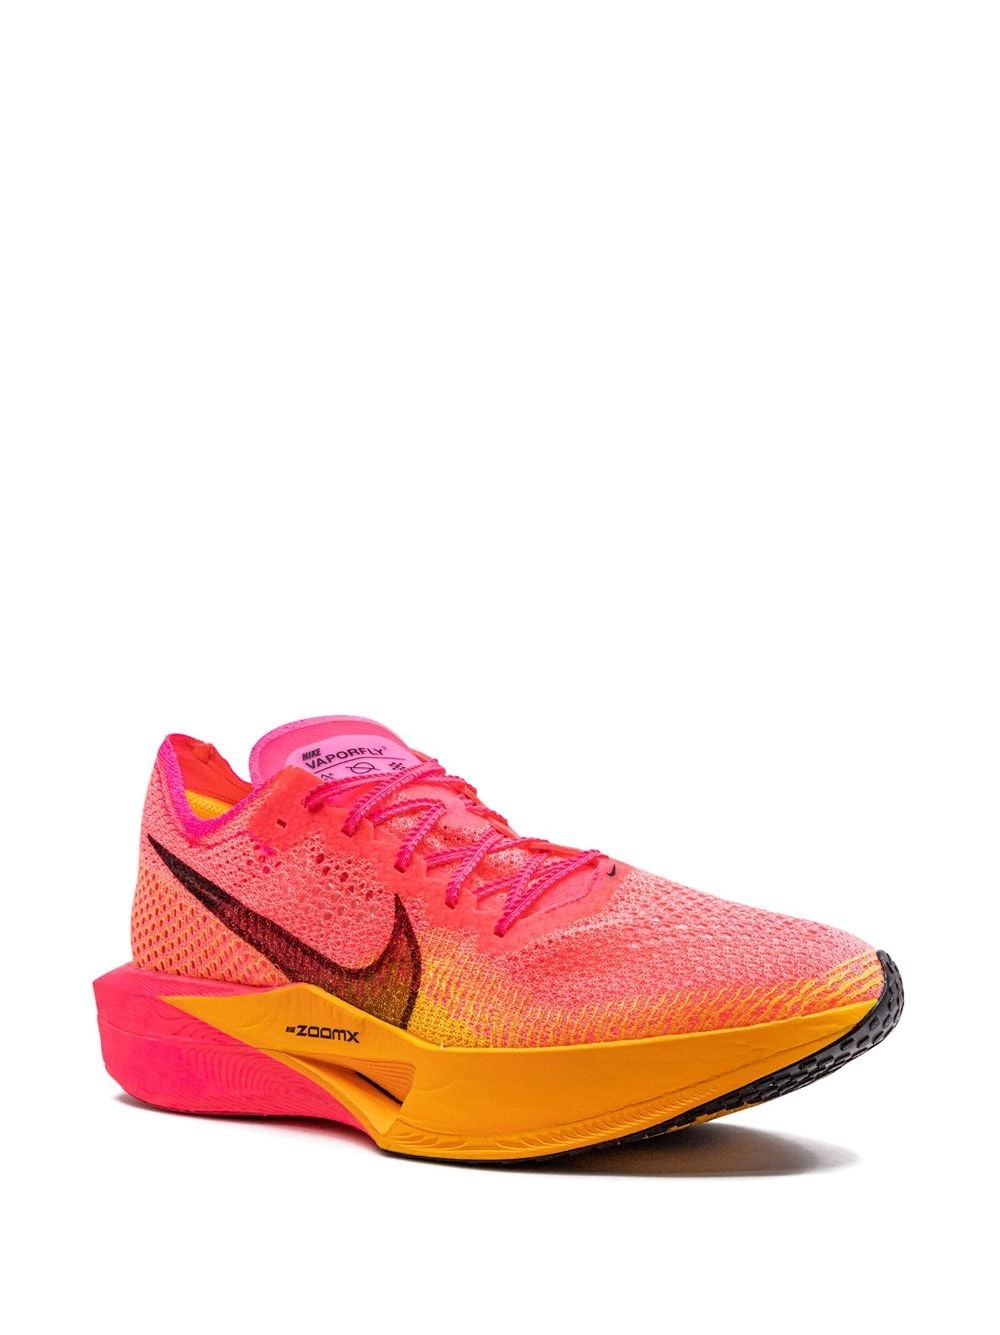 ZoomX Vaporfly Next% 3 sneakers - 2